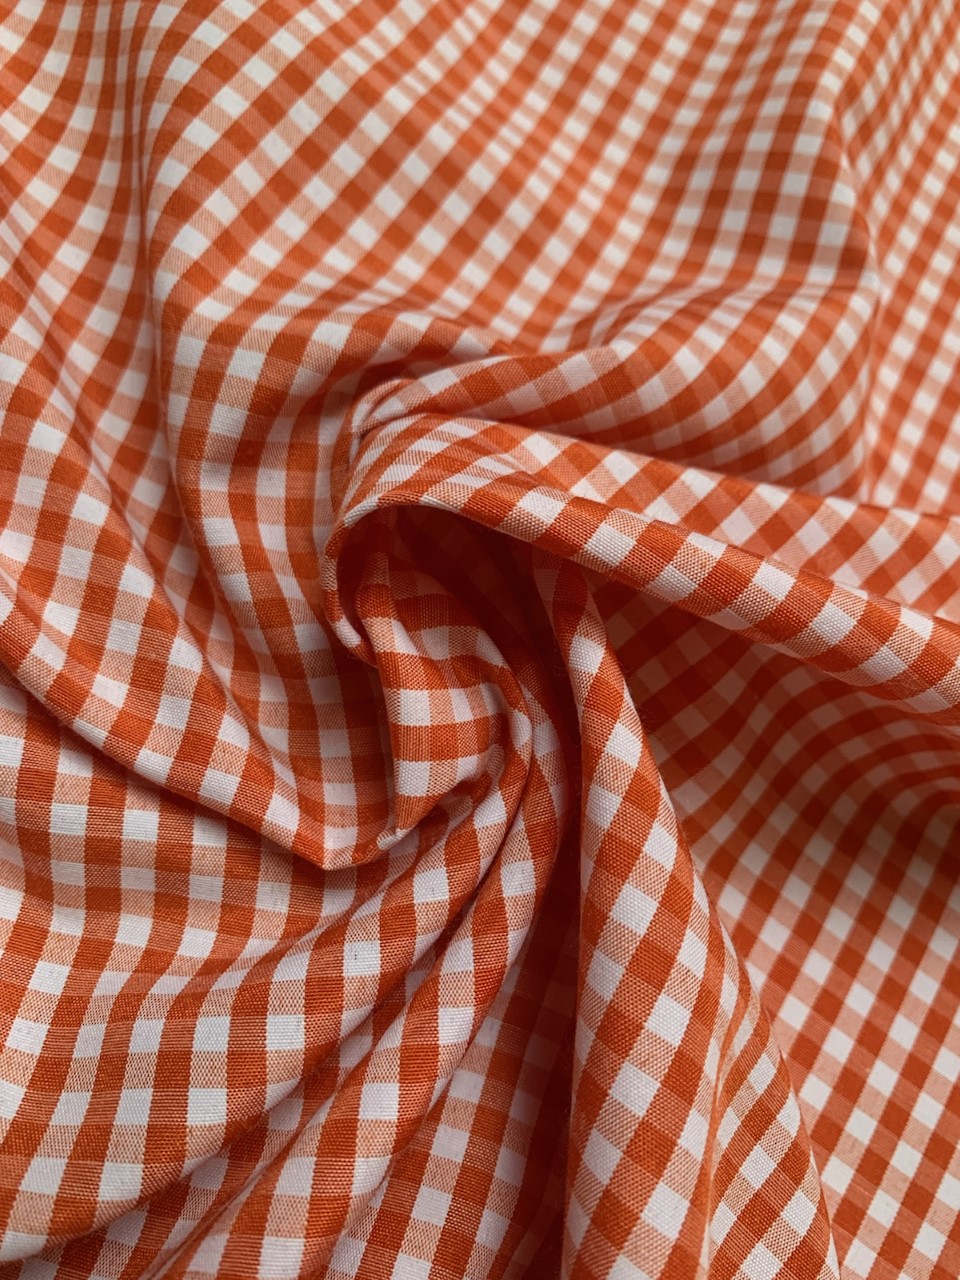 1/8" Orange Gingham Fabric 60"Wide By The Yard Poly Cotton Blend